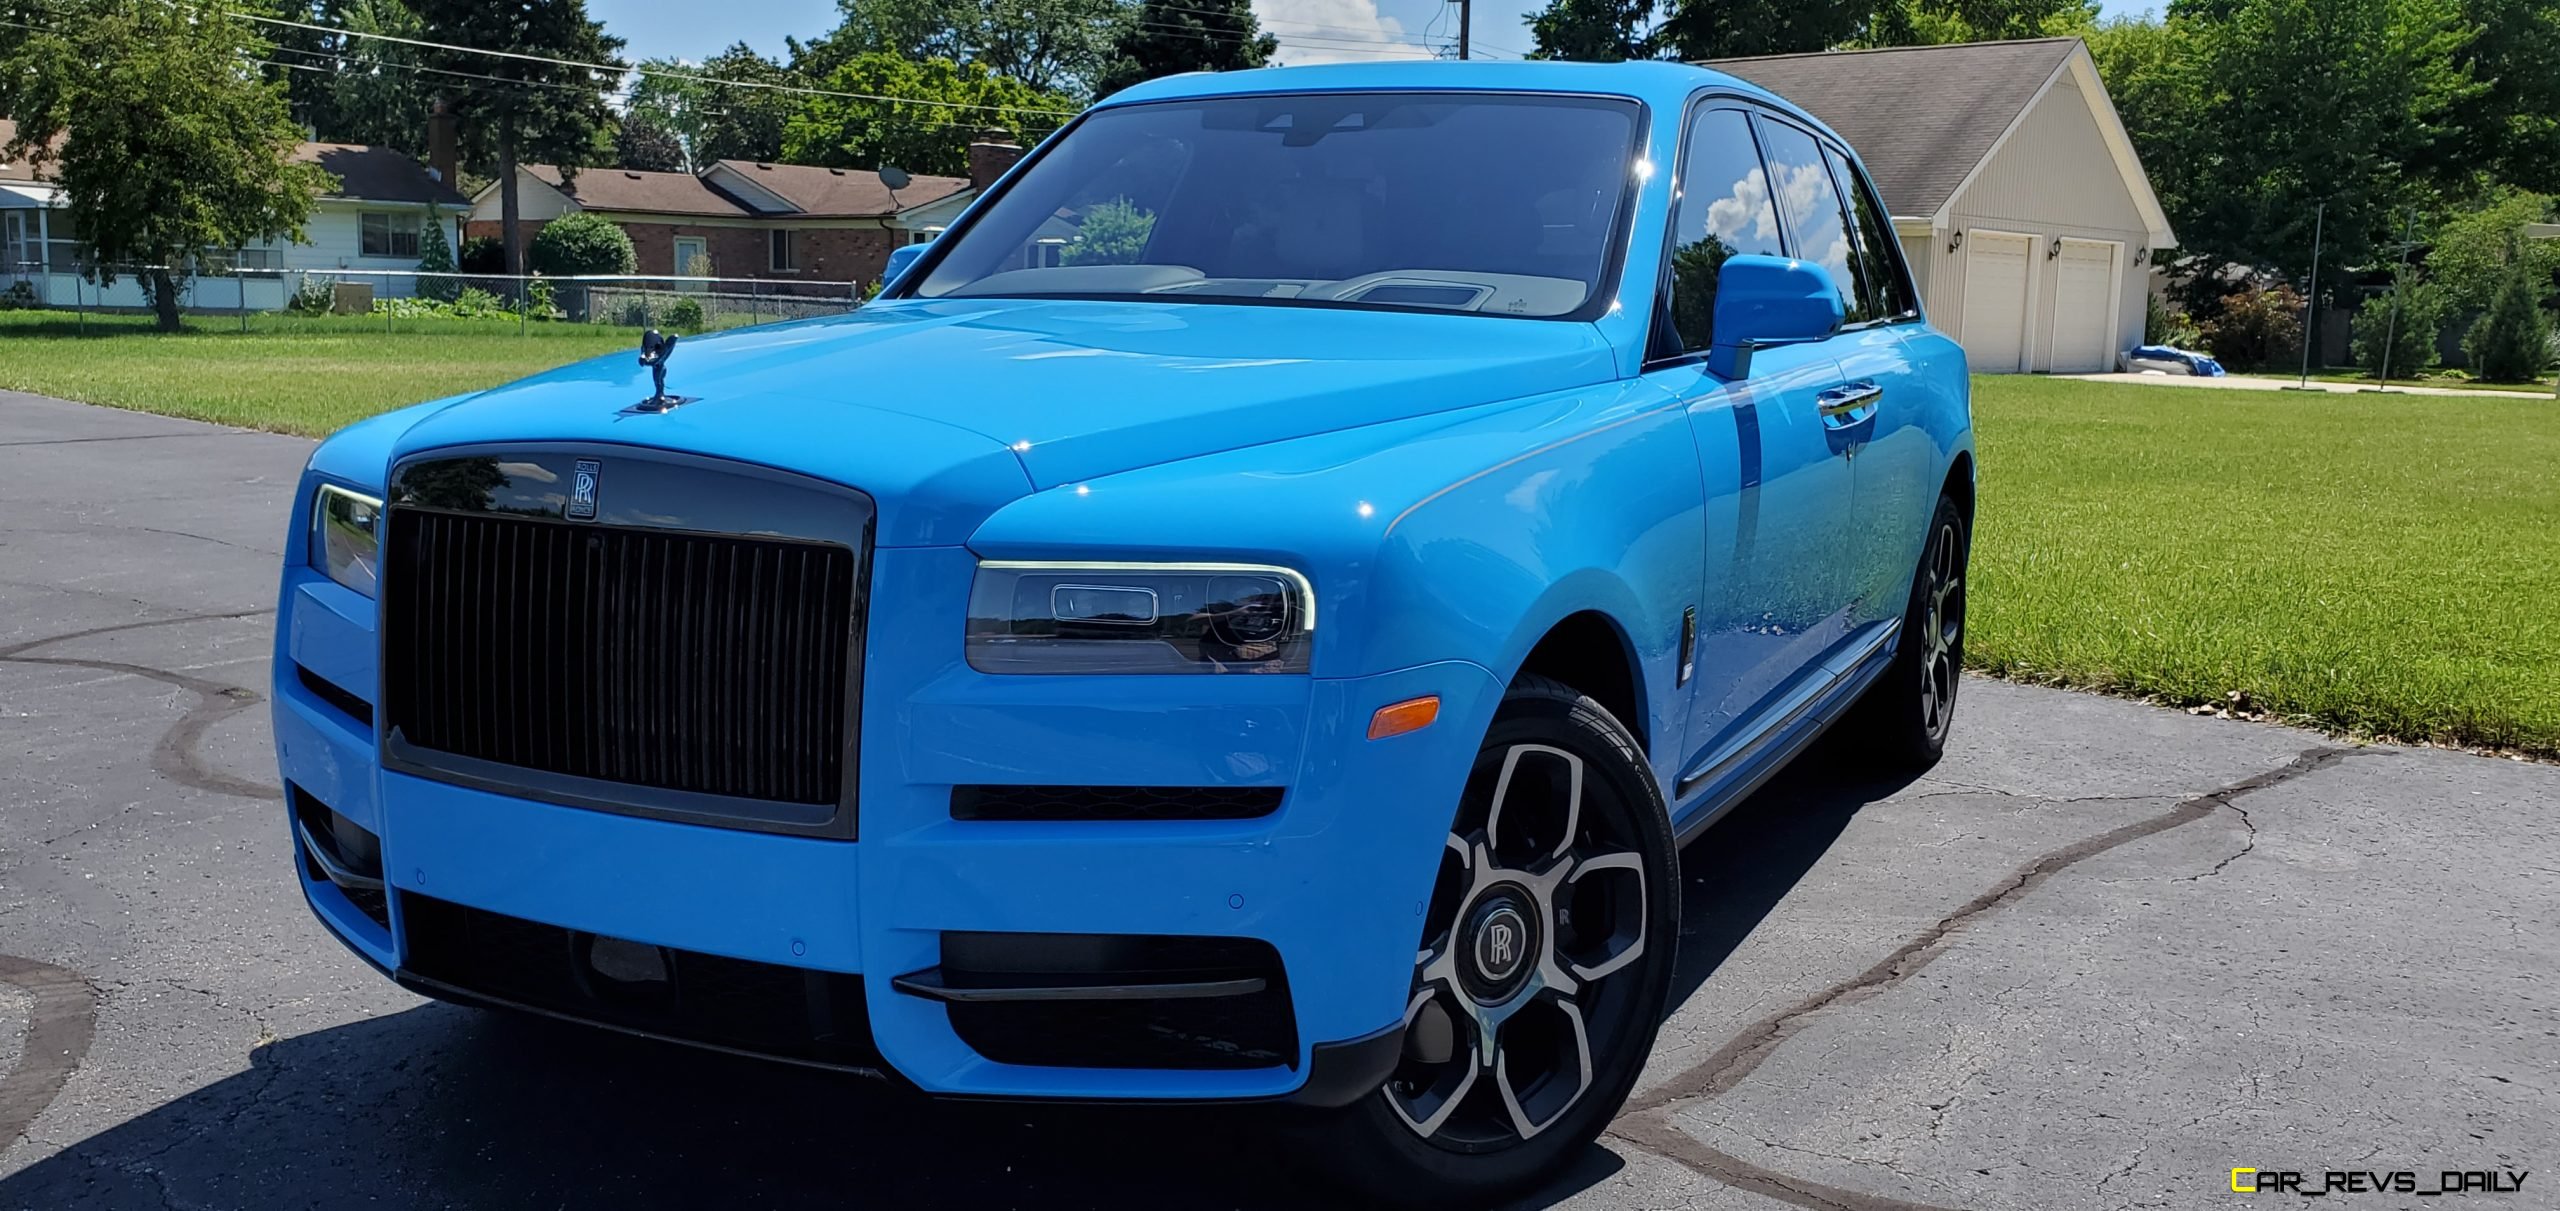 Used Blue RollsRoyce Cullinan Cars For Sale  AutoTrader UK